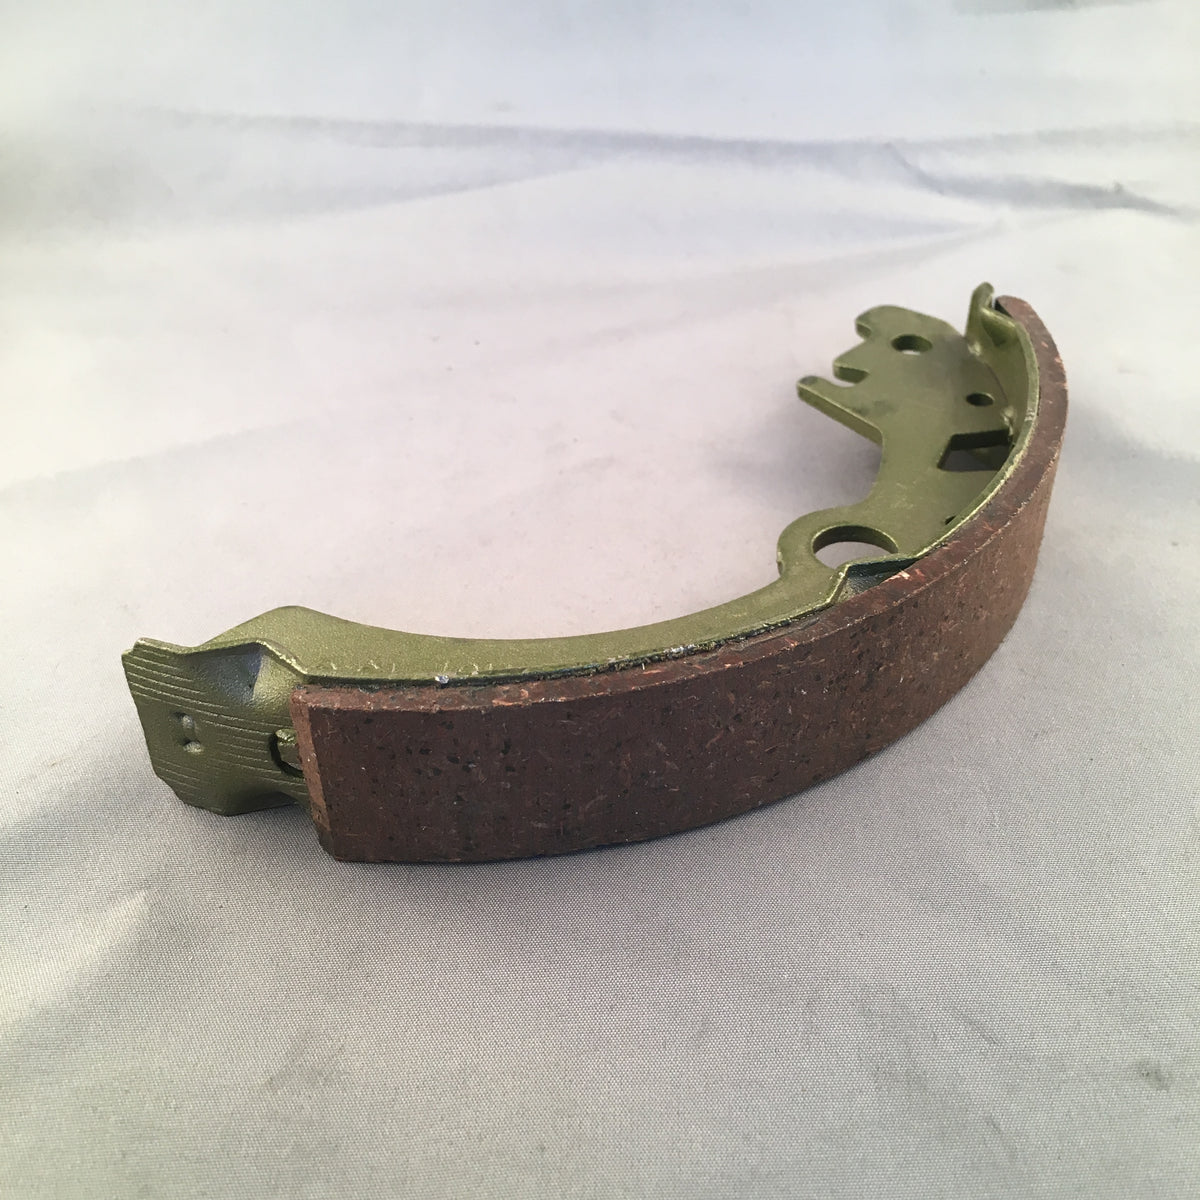 EMC REAR BRAKE SHOES FOR 180 MM DRUMS